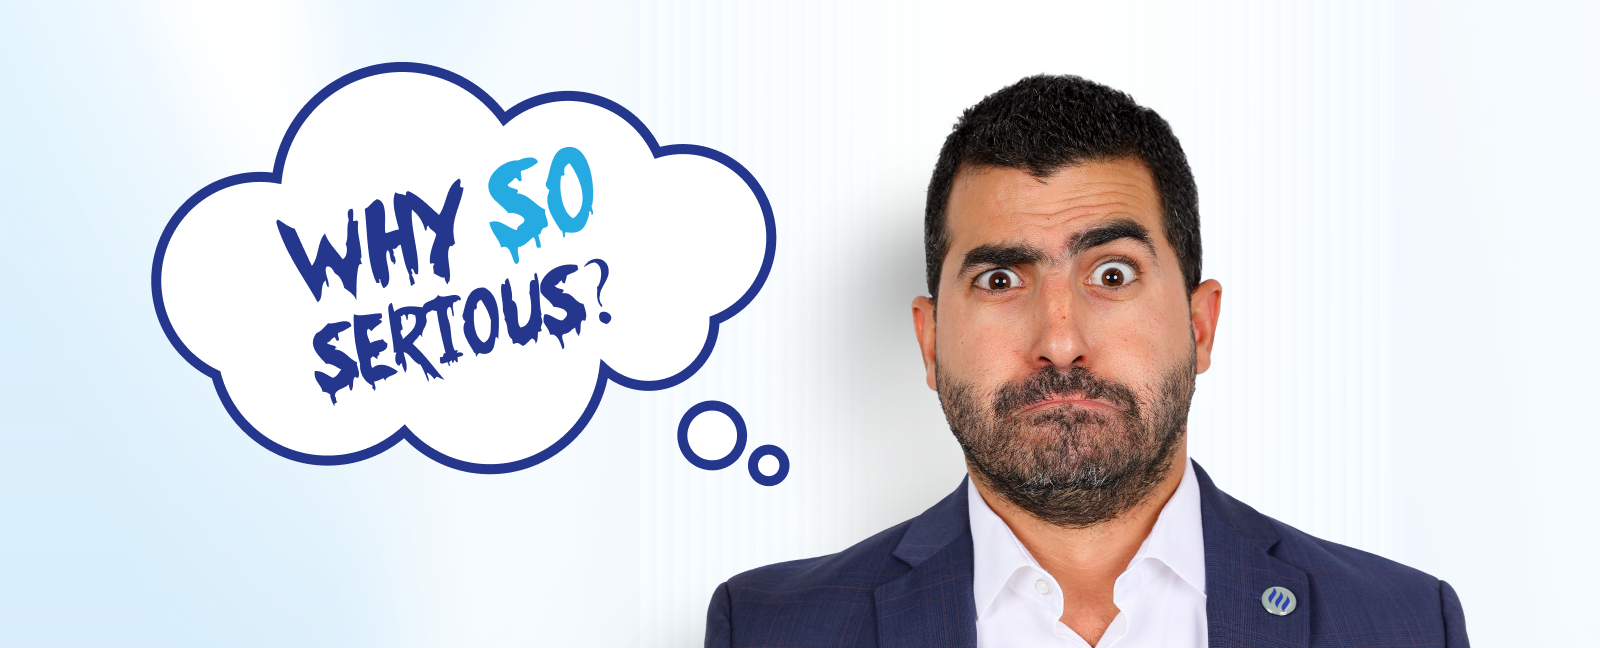 Why So Serious? Embracing Humor in the Workplace